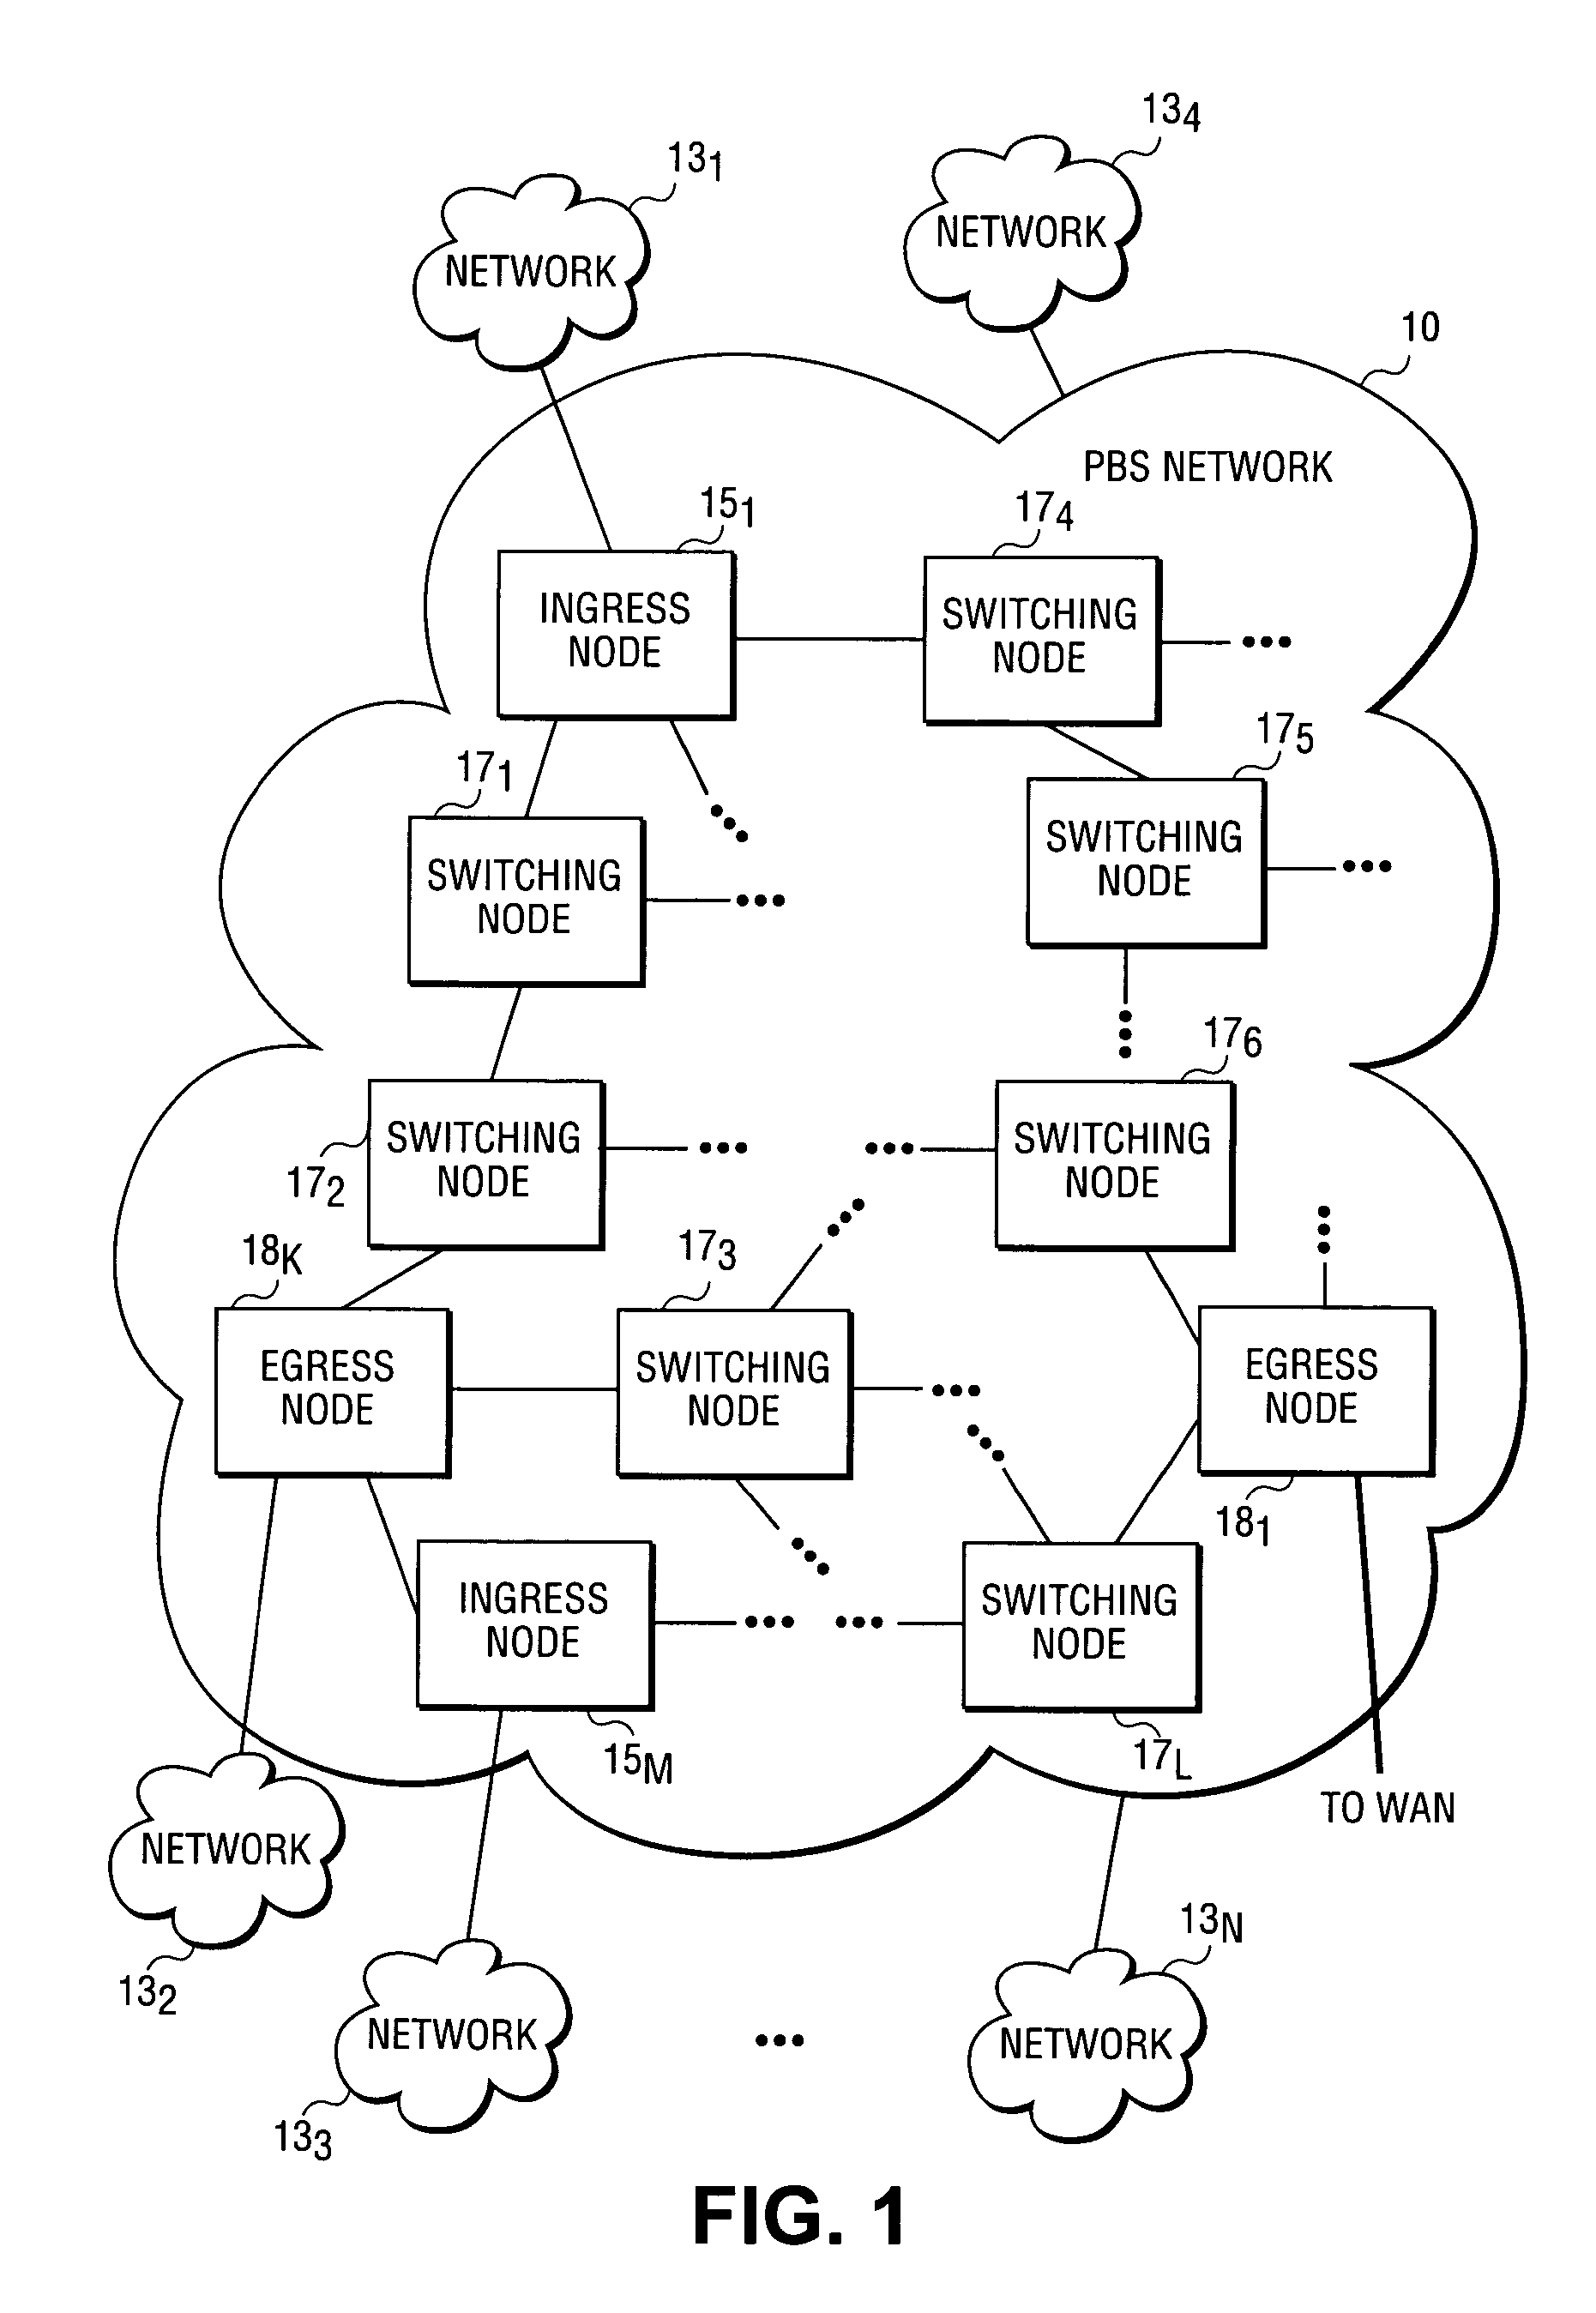 Generic multi-protocol label switching (GMPLS)-based label space architecture for optical switched networks